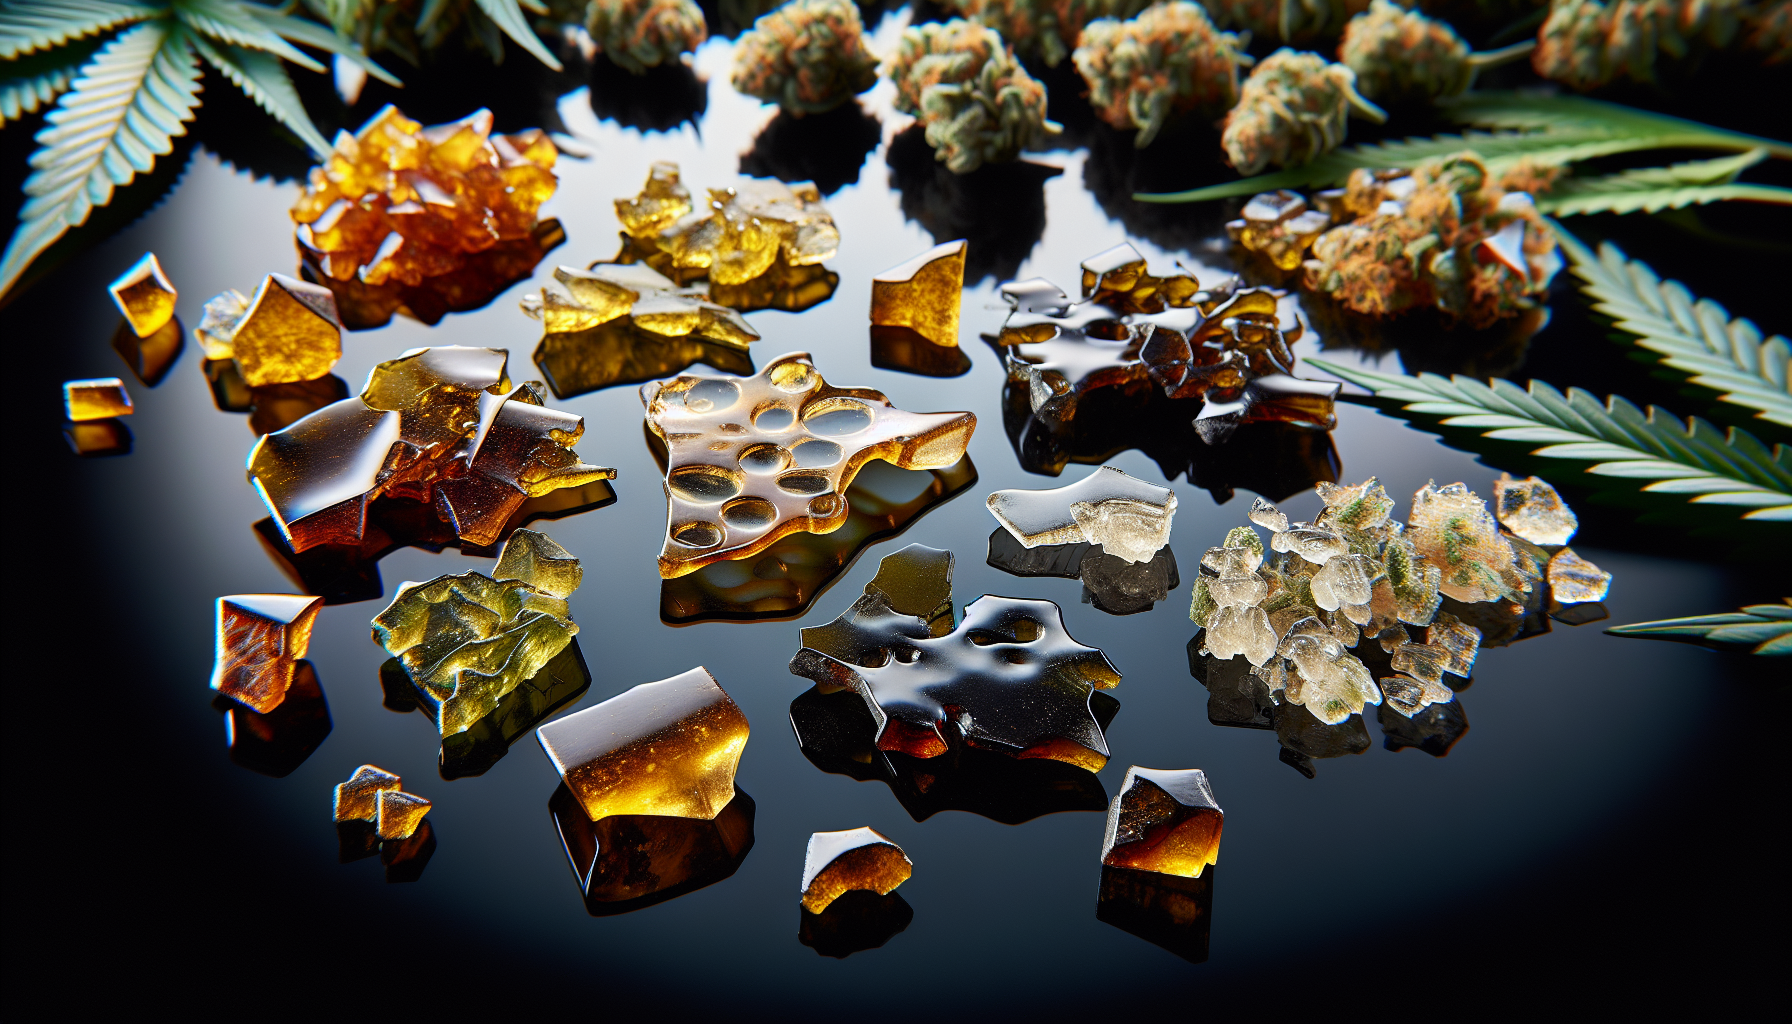 Shatter and crumble concentrates